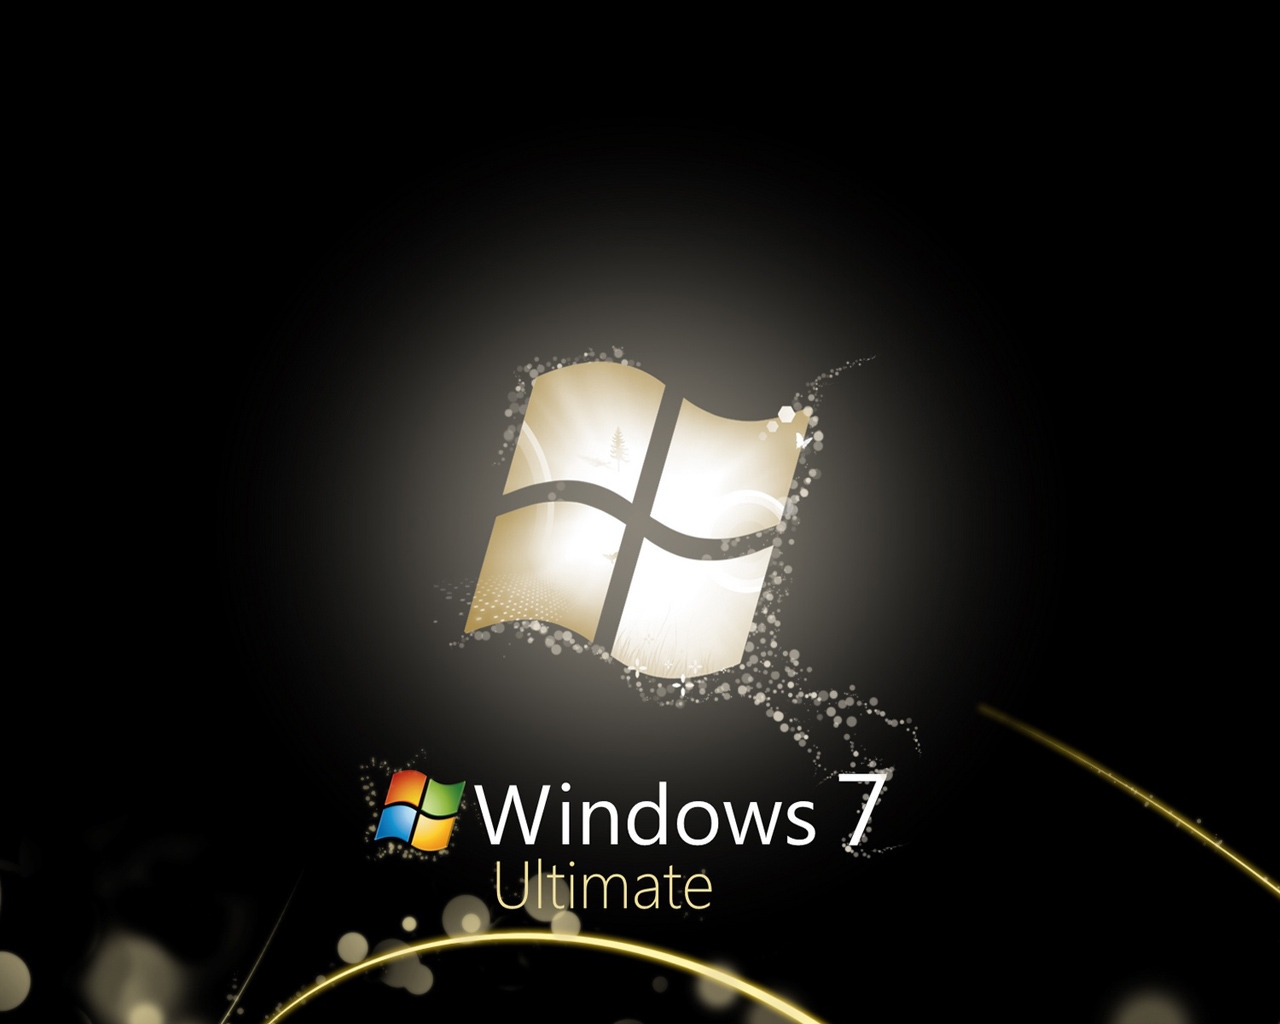 Black Windows 7 Ultimate for 1280 x 1024 resolution